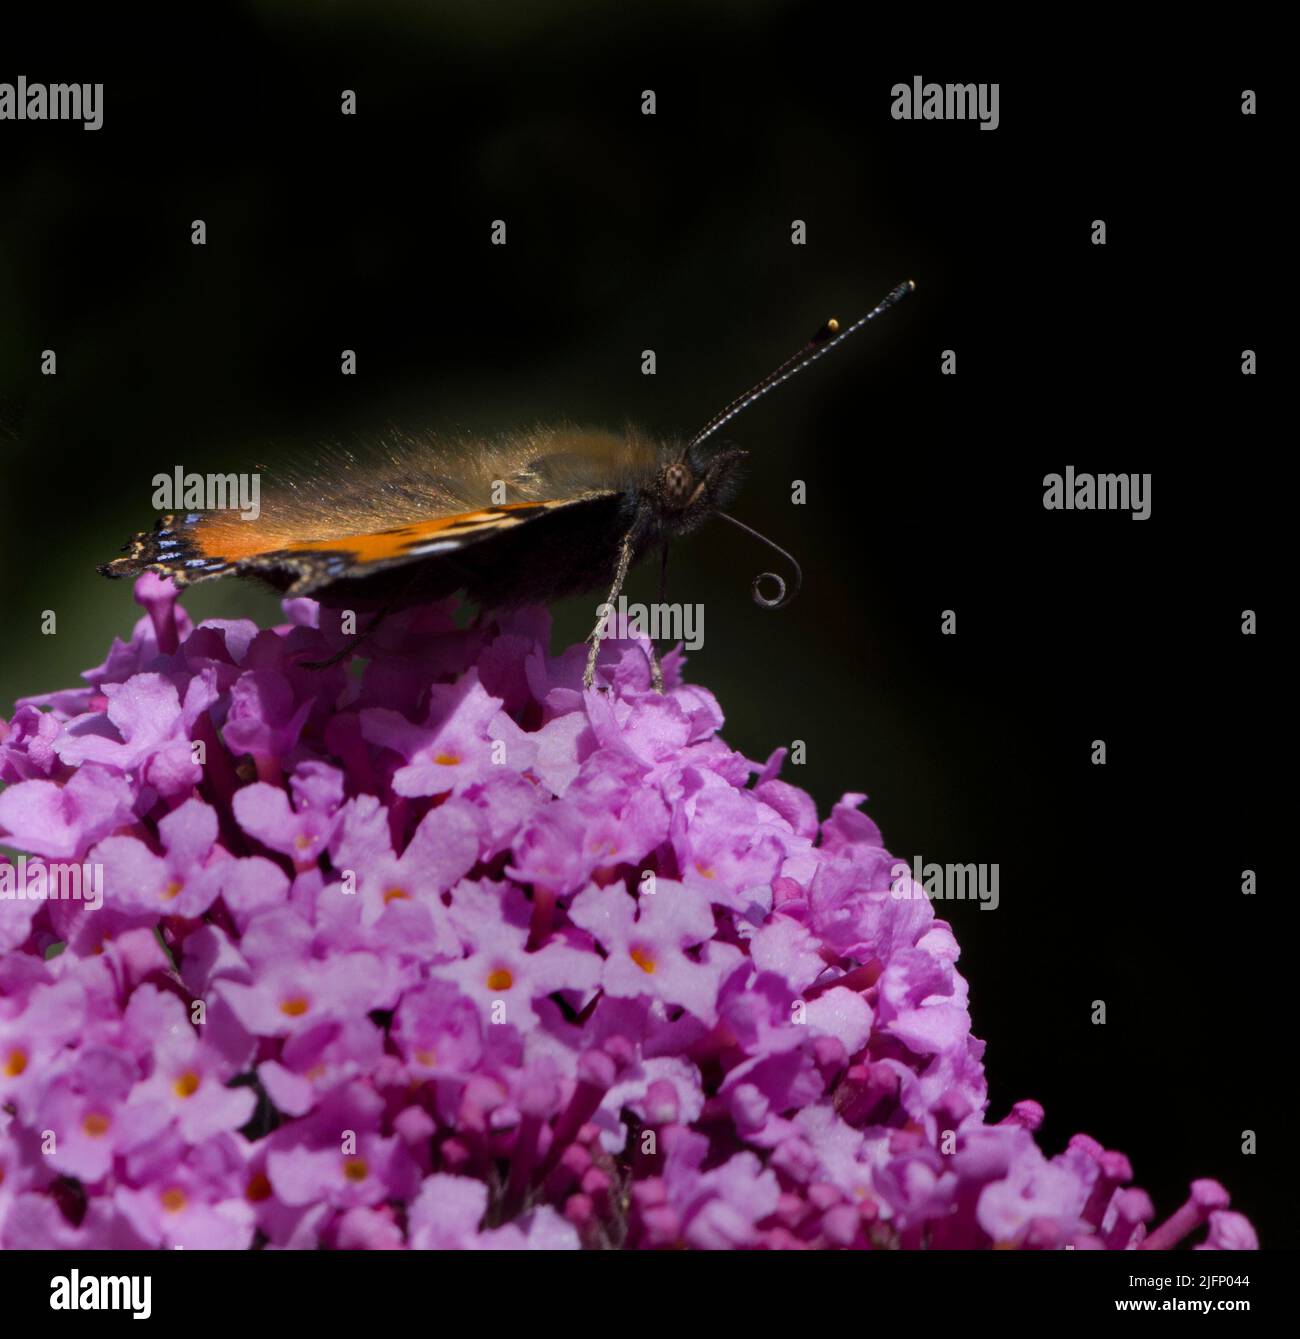 Small Tortoiseshell Butterfly Aglais Urticae Coiled Curled Proboscis Collecting Nectar from Pink Buddleia Stock Photo